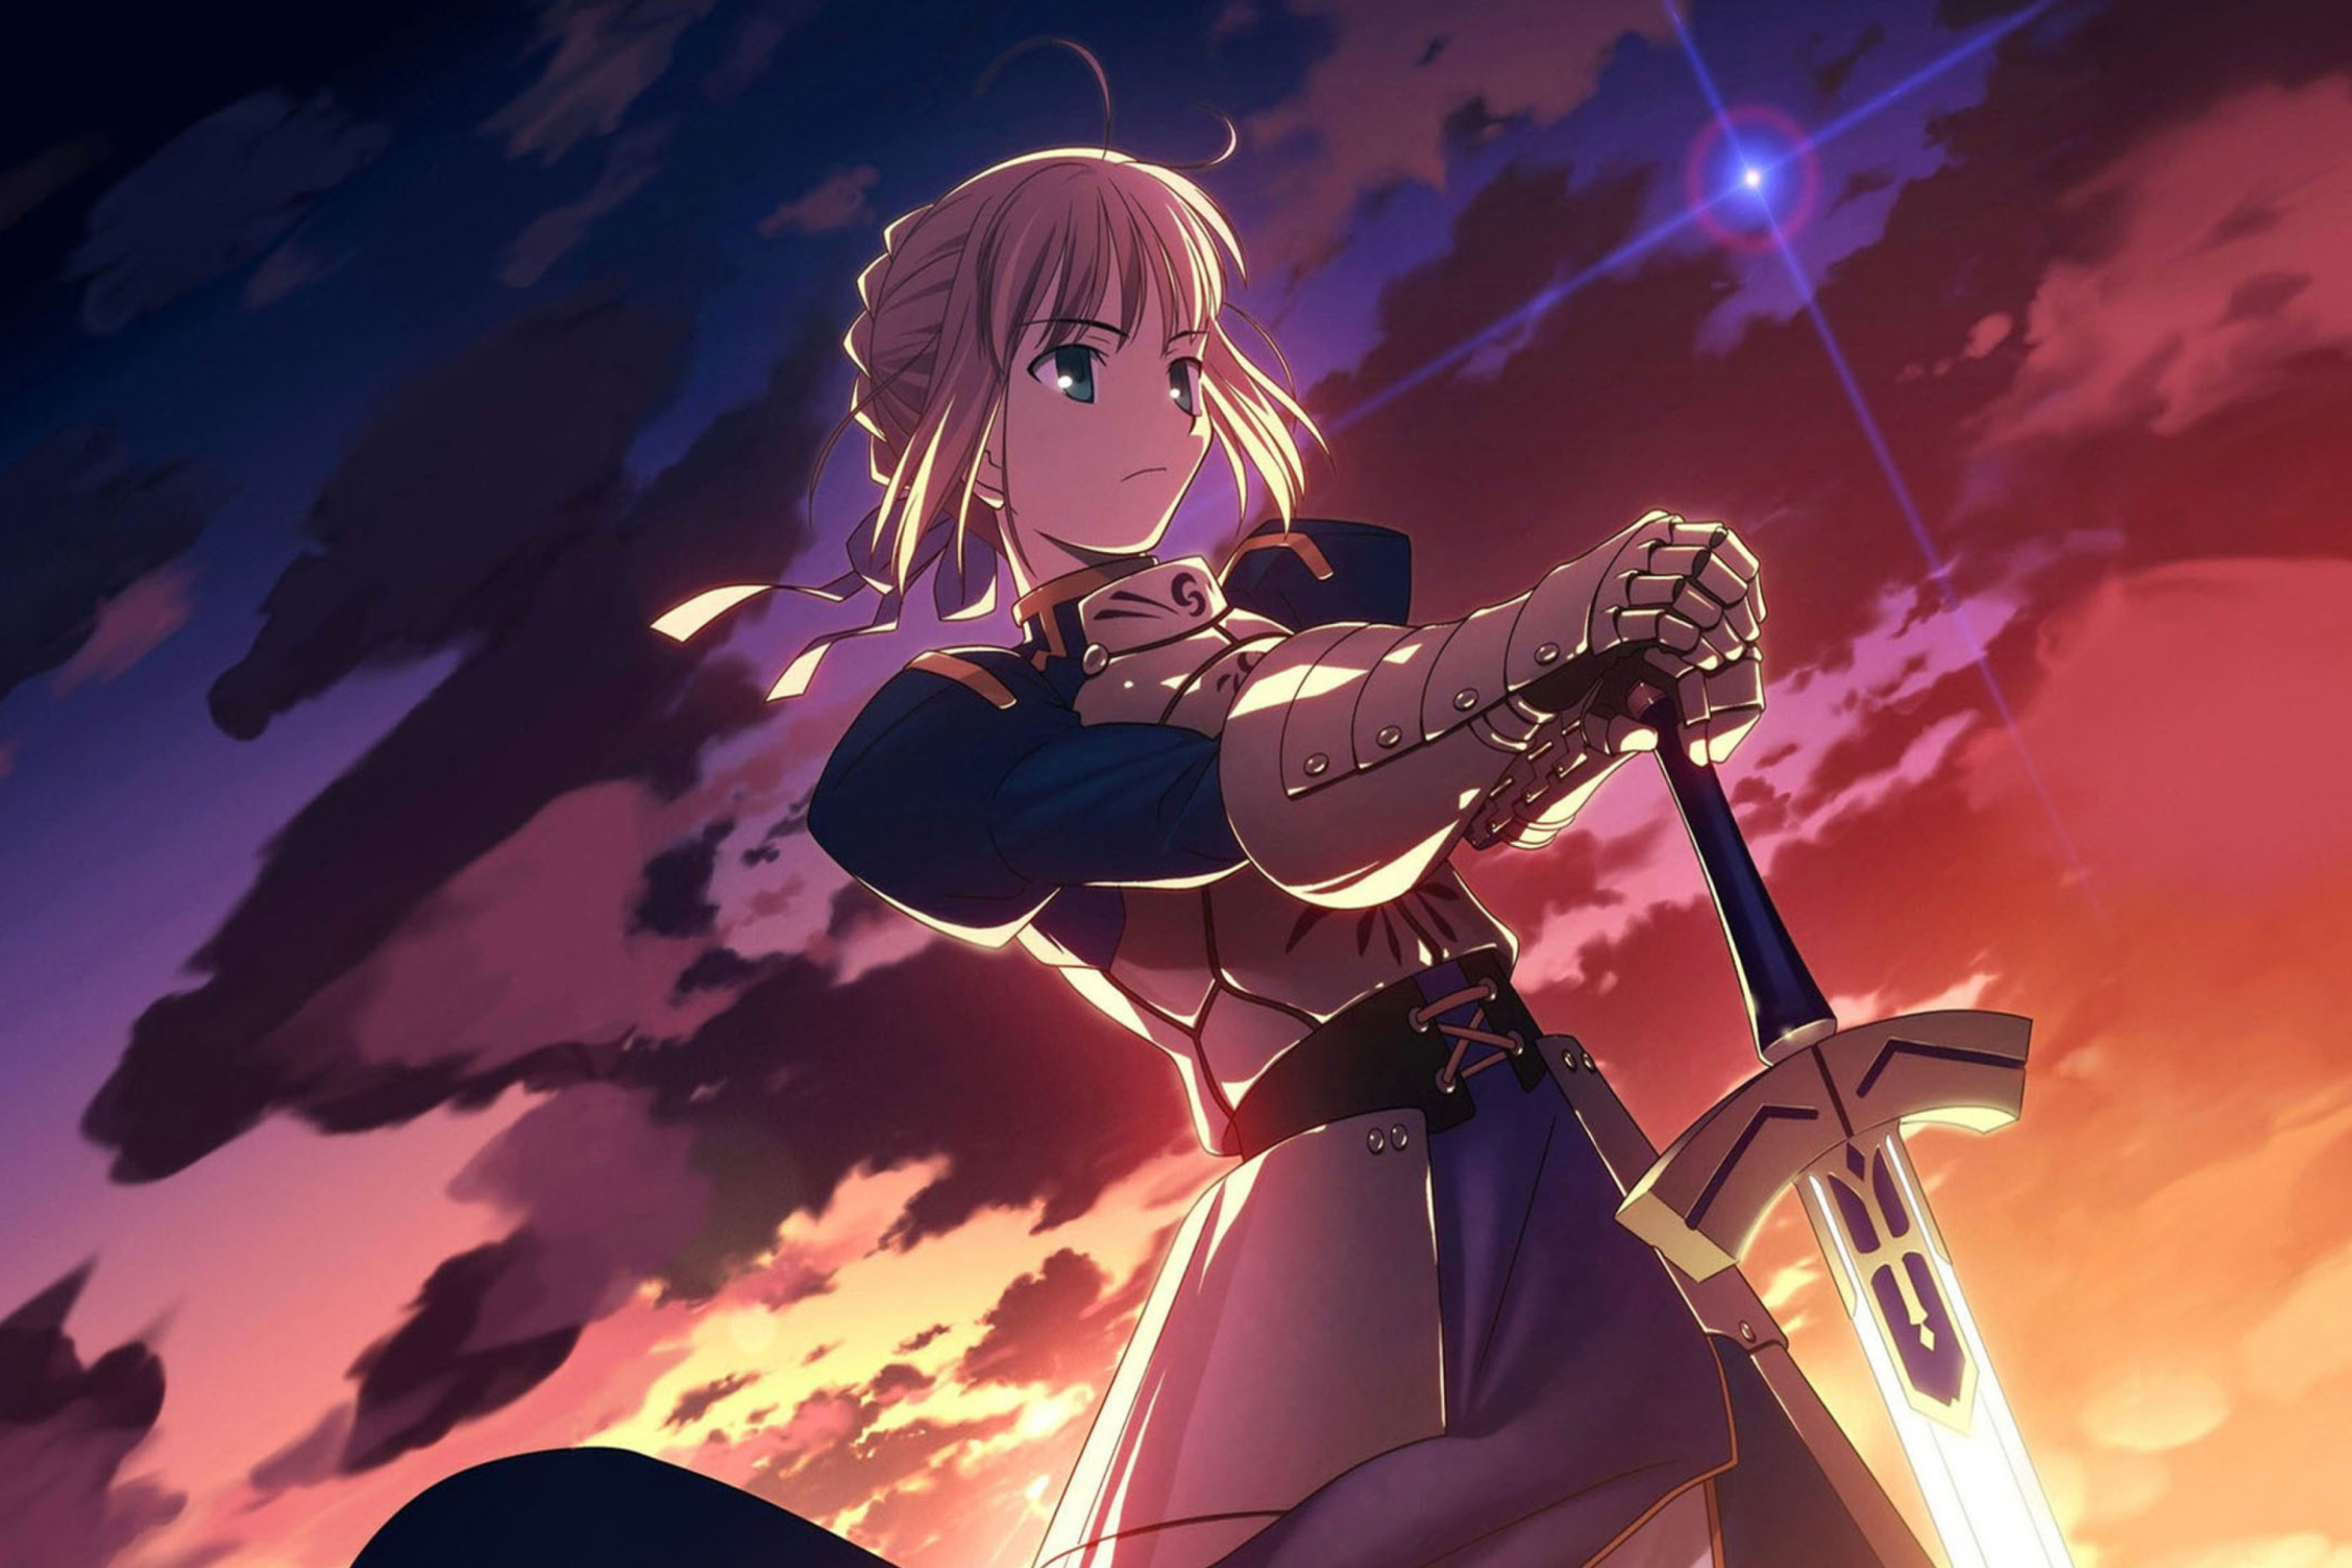 Saber from Fate/stay night wallpaper 2880x1920